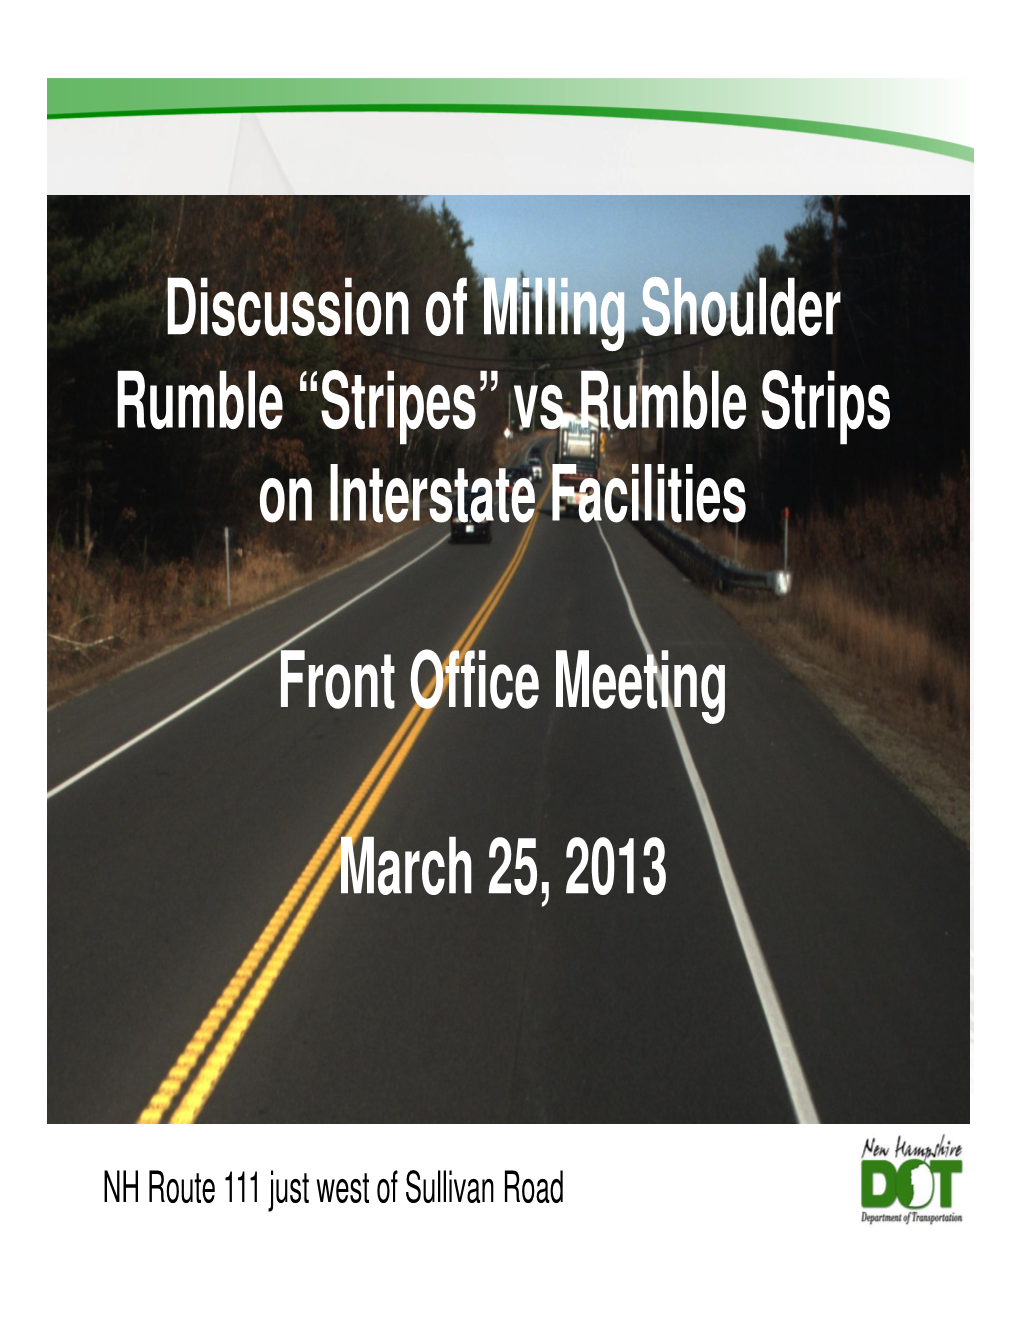 Discussion of Milling Shoulder Rumble “Stripes” Vs Rumble Strips on Interstate Facilities